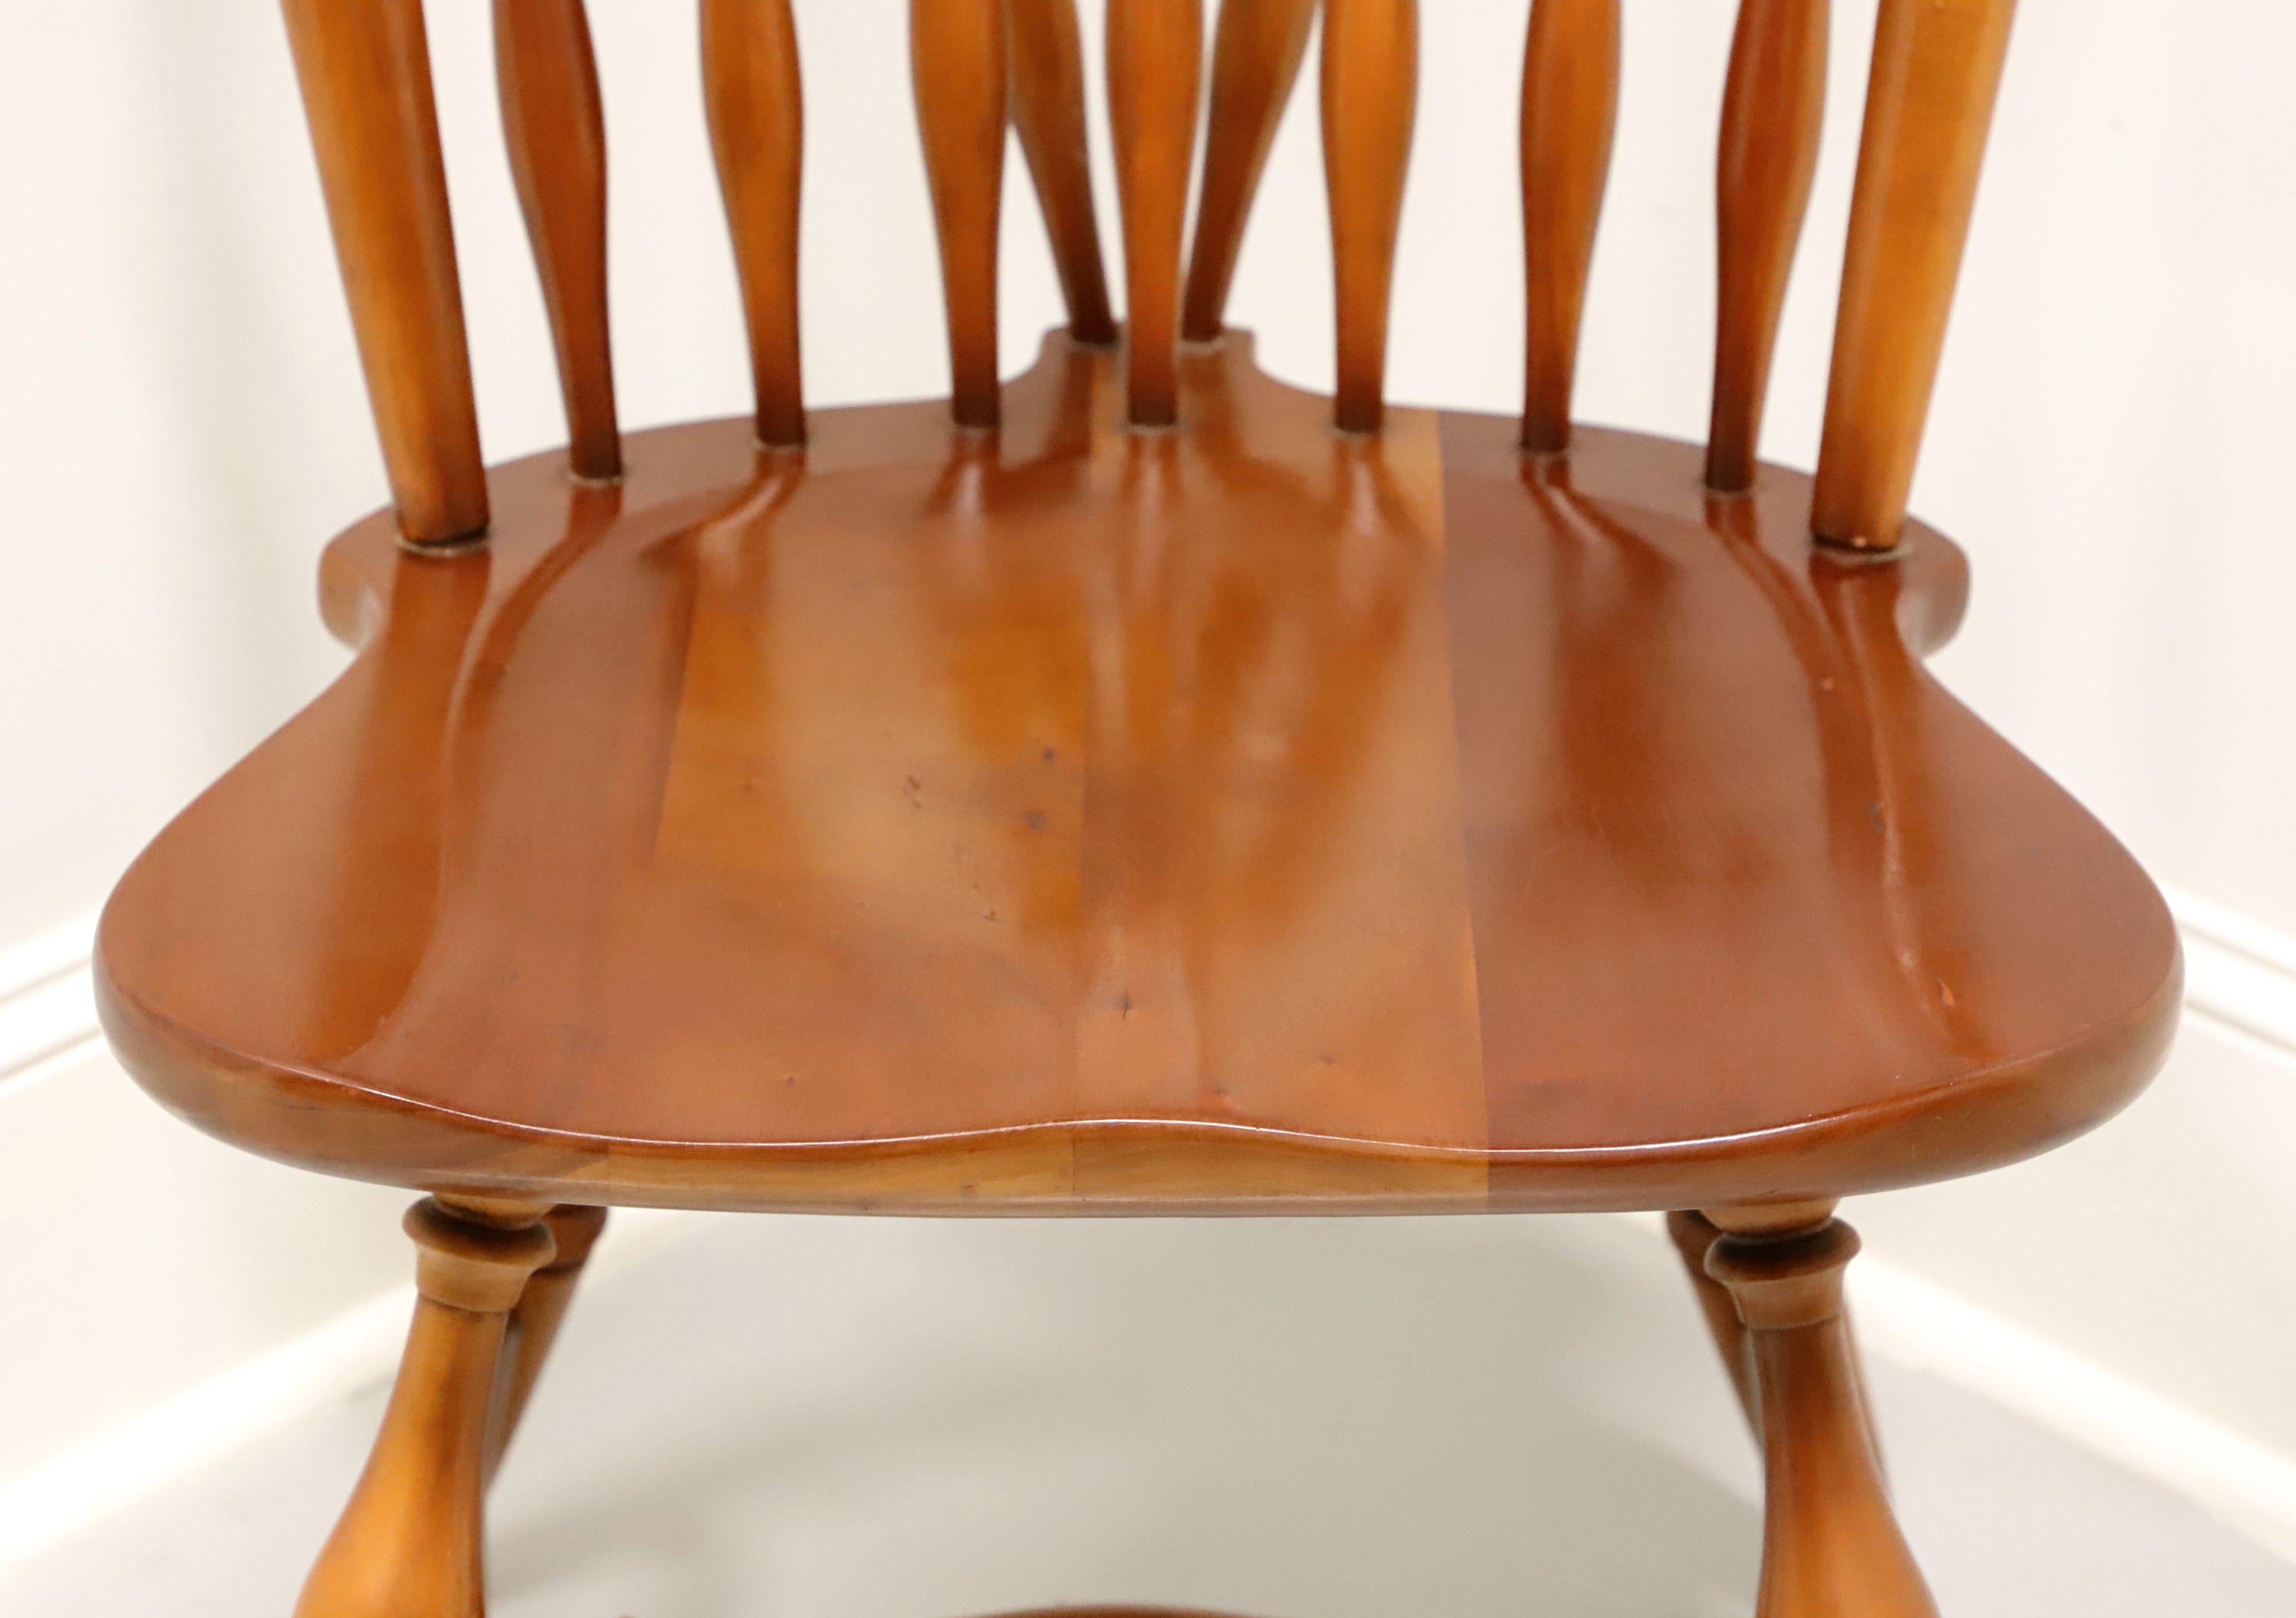 Other ETHAN ALLEN Duxbury Maple Windsor Dining Side Chair - B